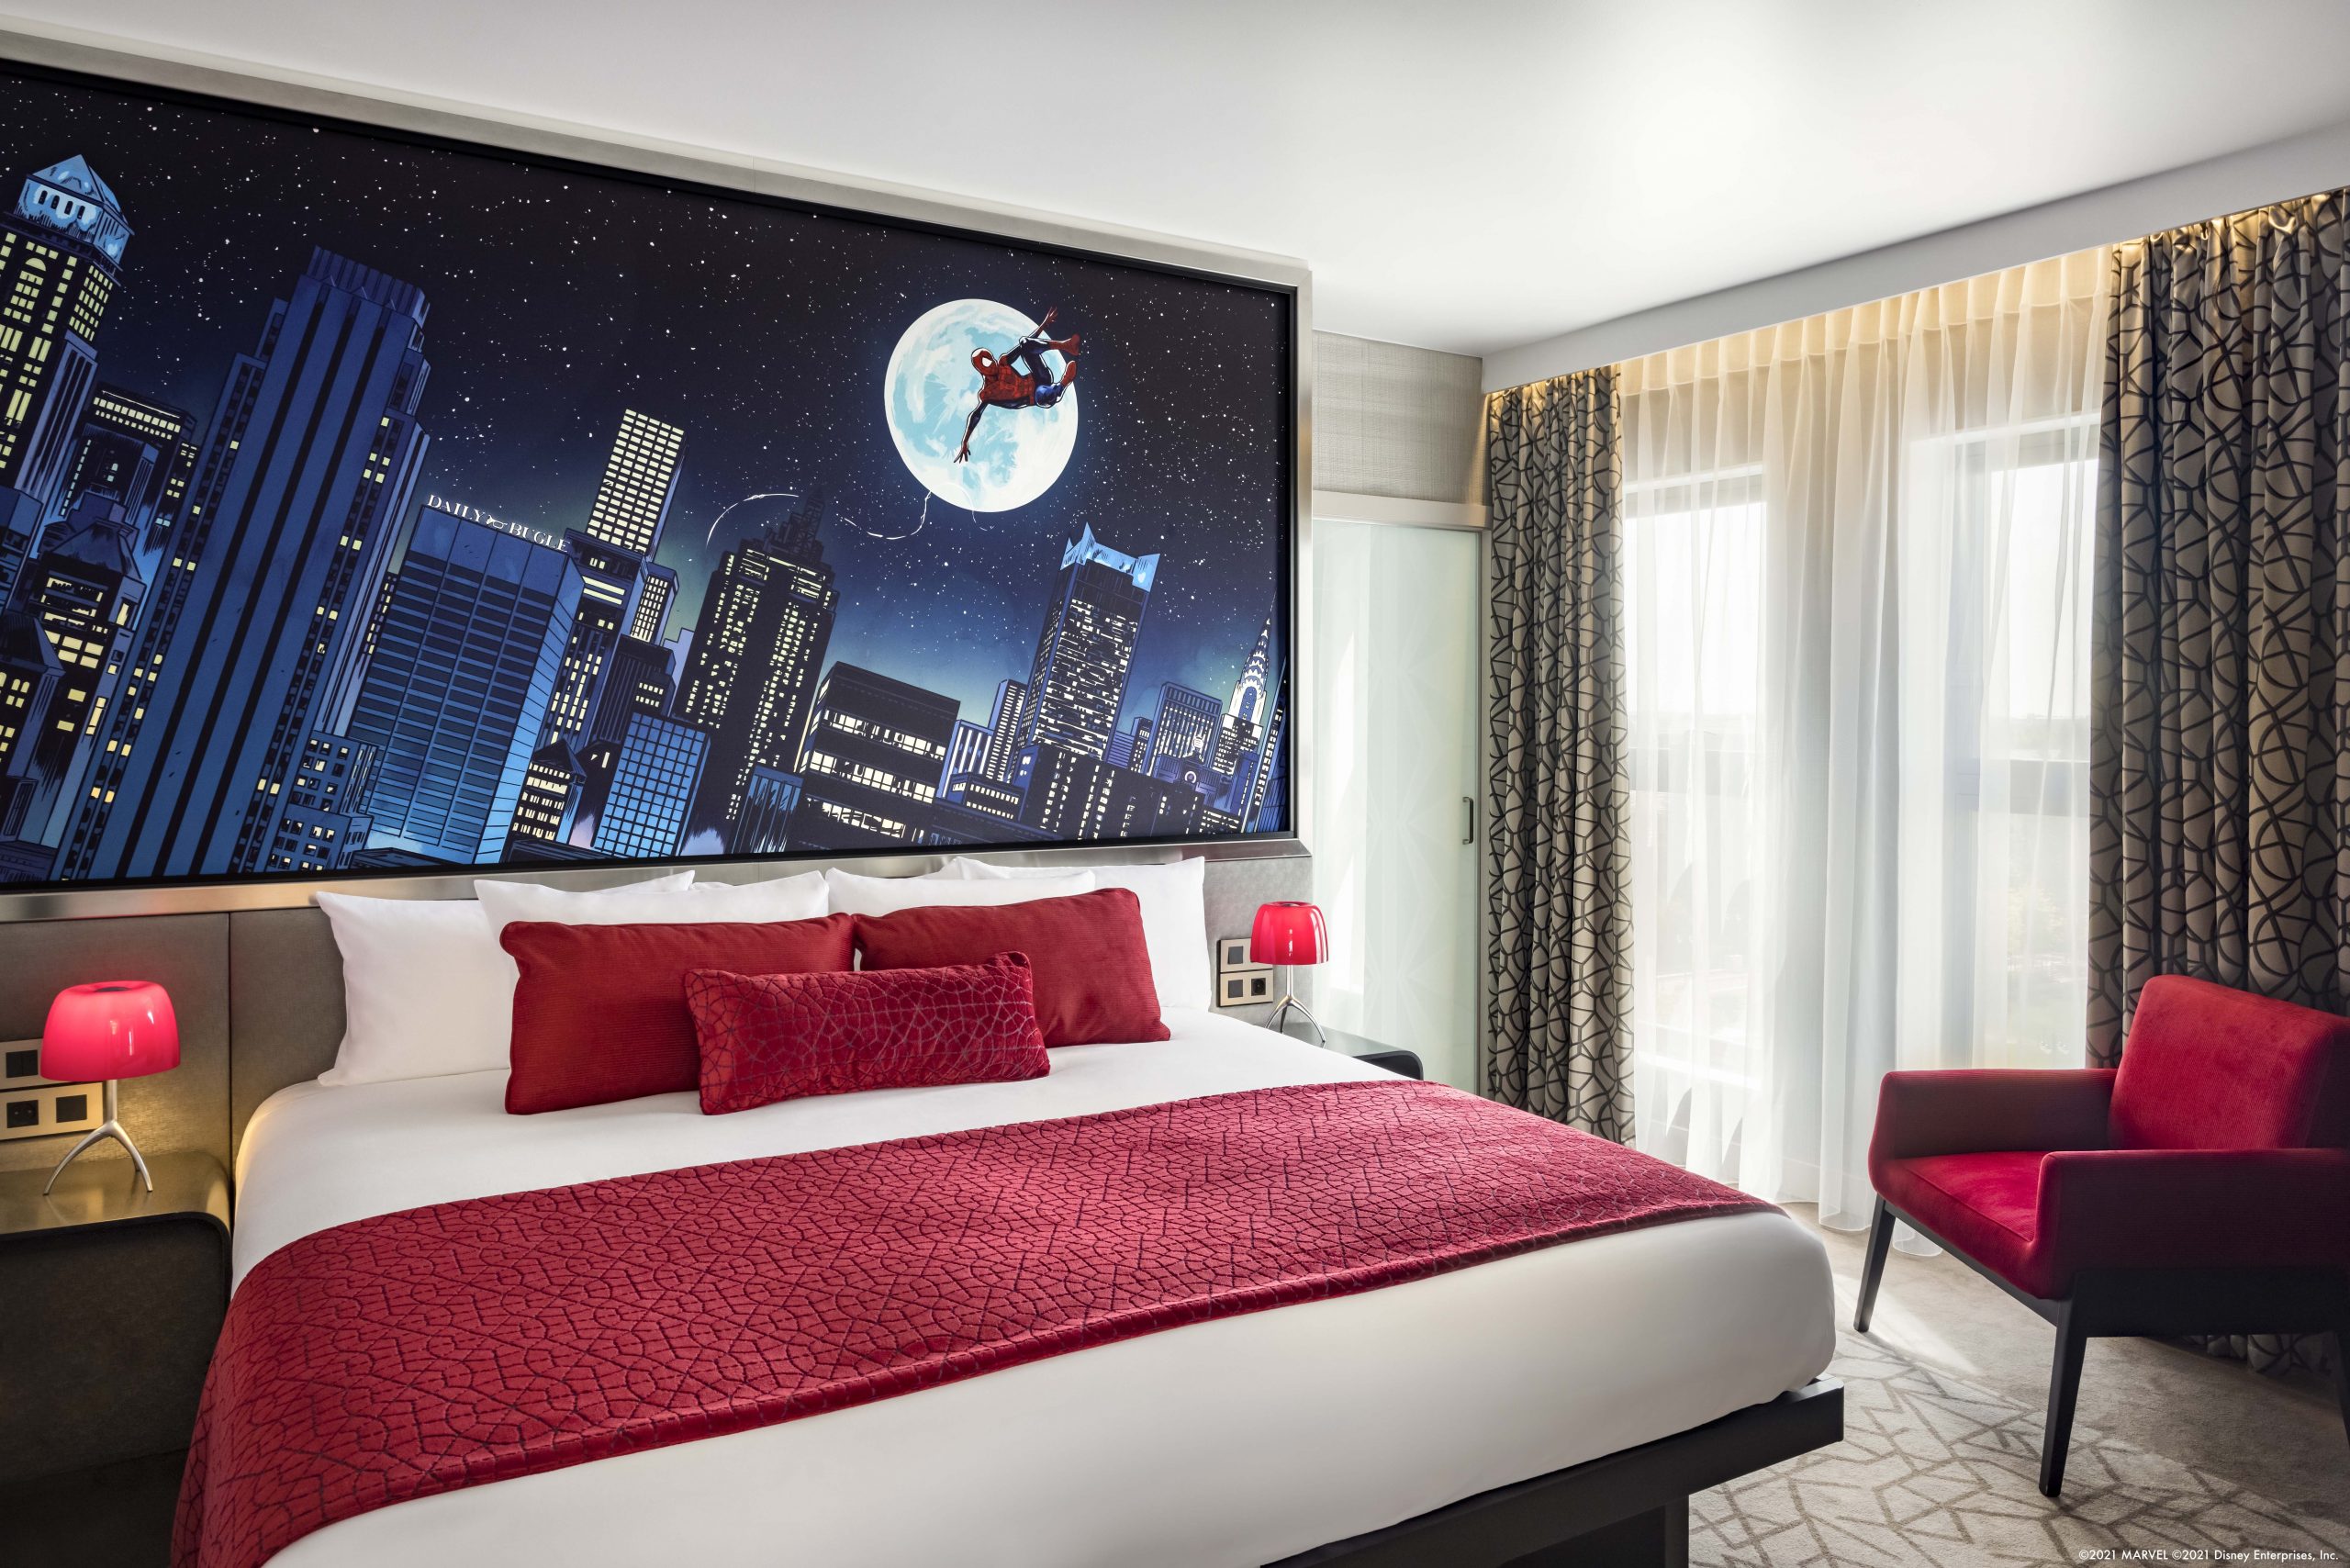 The first hotel in the world dedicated to MARVEL artwork, opens today at Disneyland® Paris